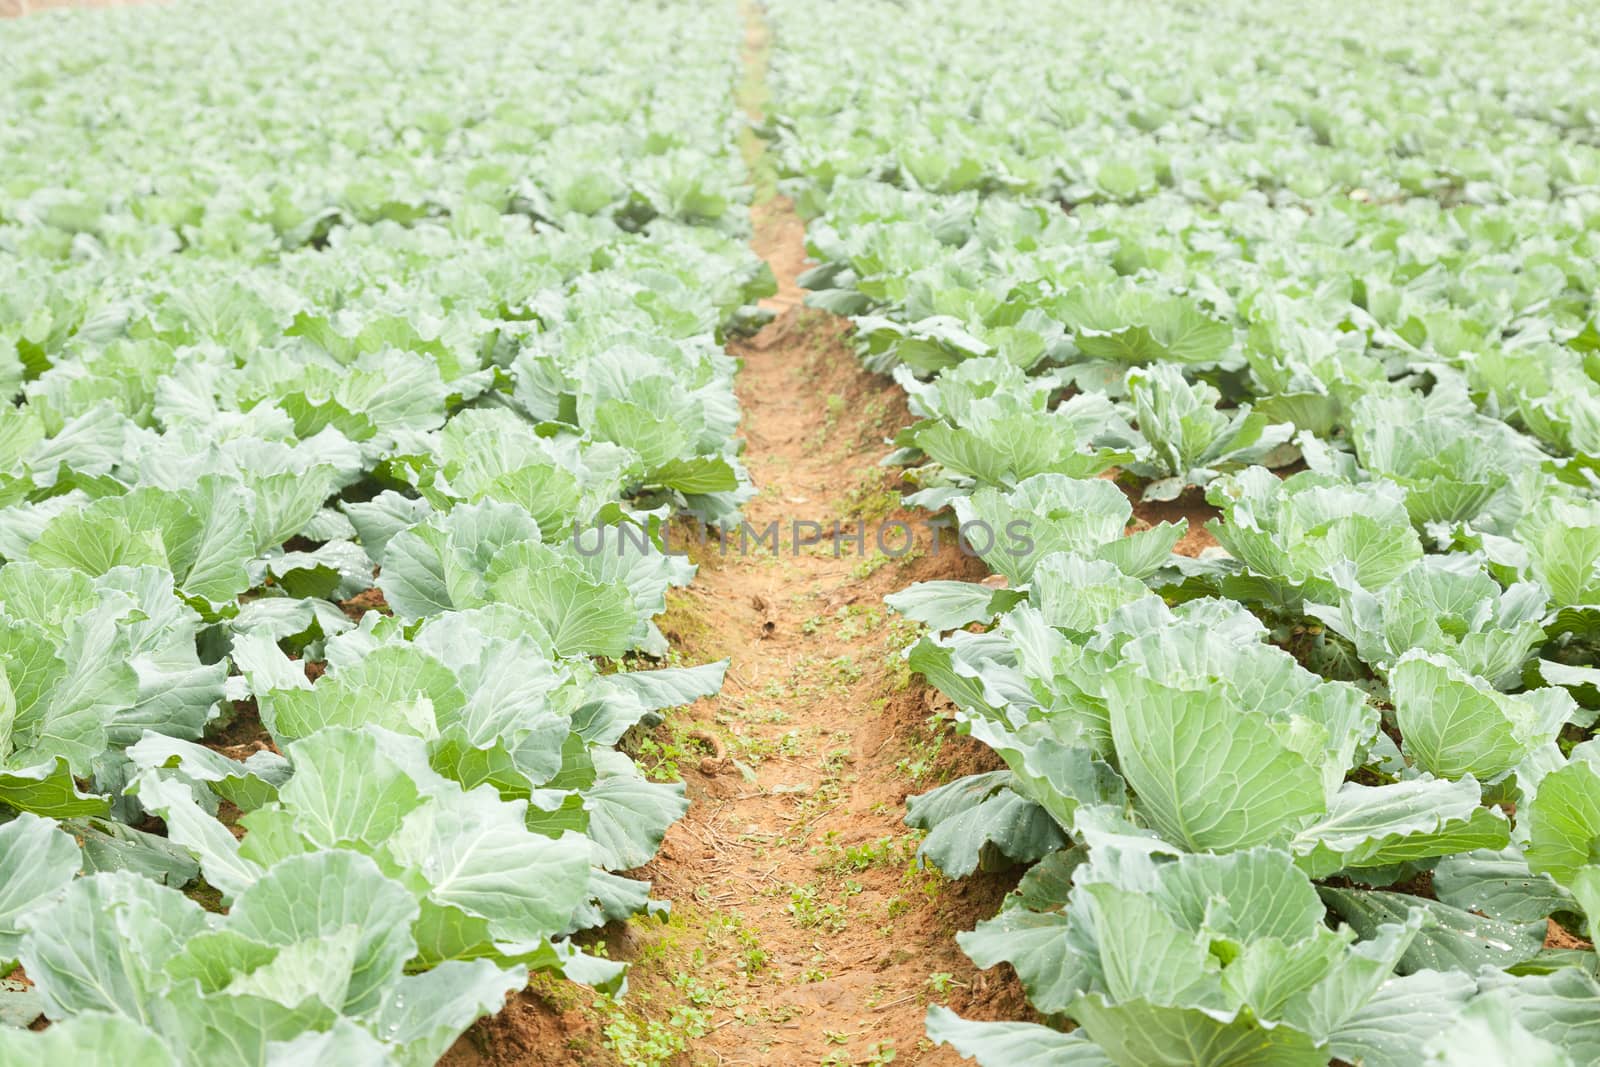 Agriculture cabbage areas planted cabbage big mountain cold.